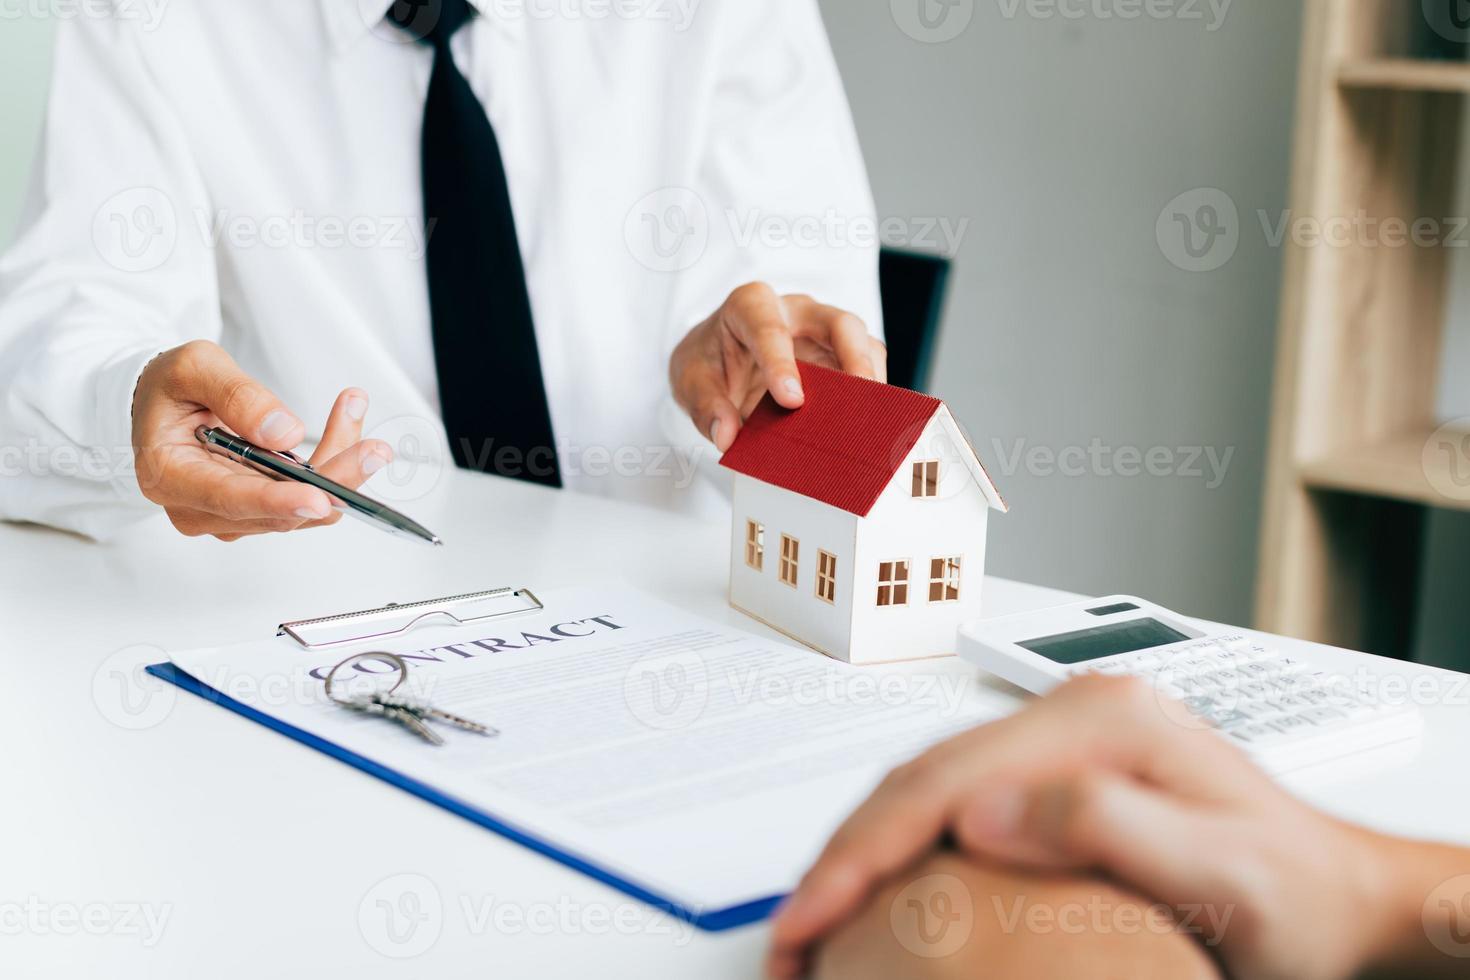 Home agents are sending pens to customers signing a contract to buy a new home. photo